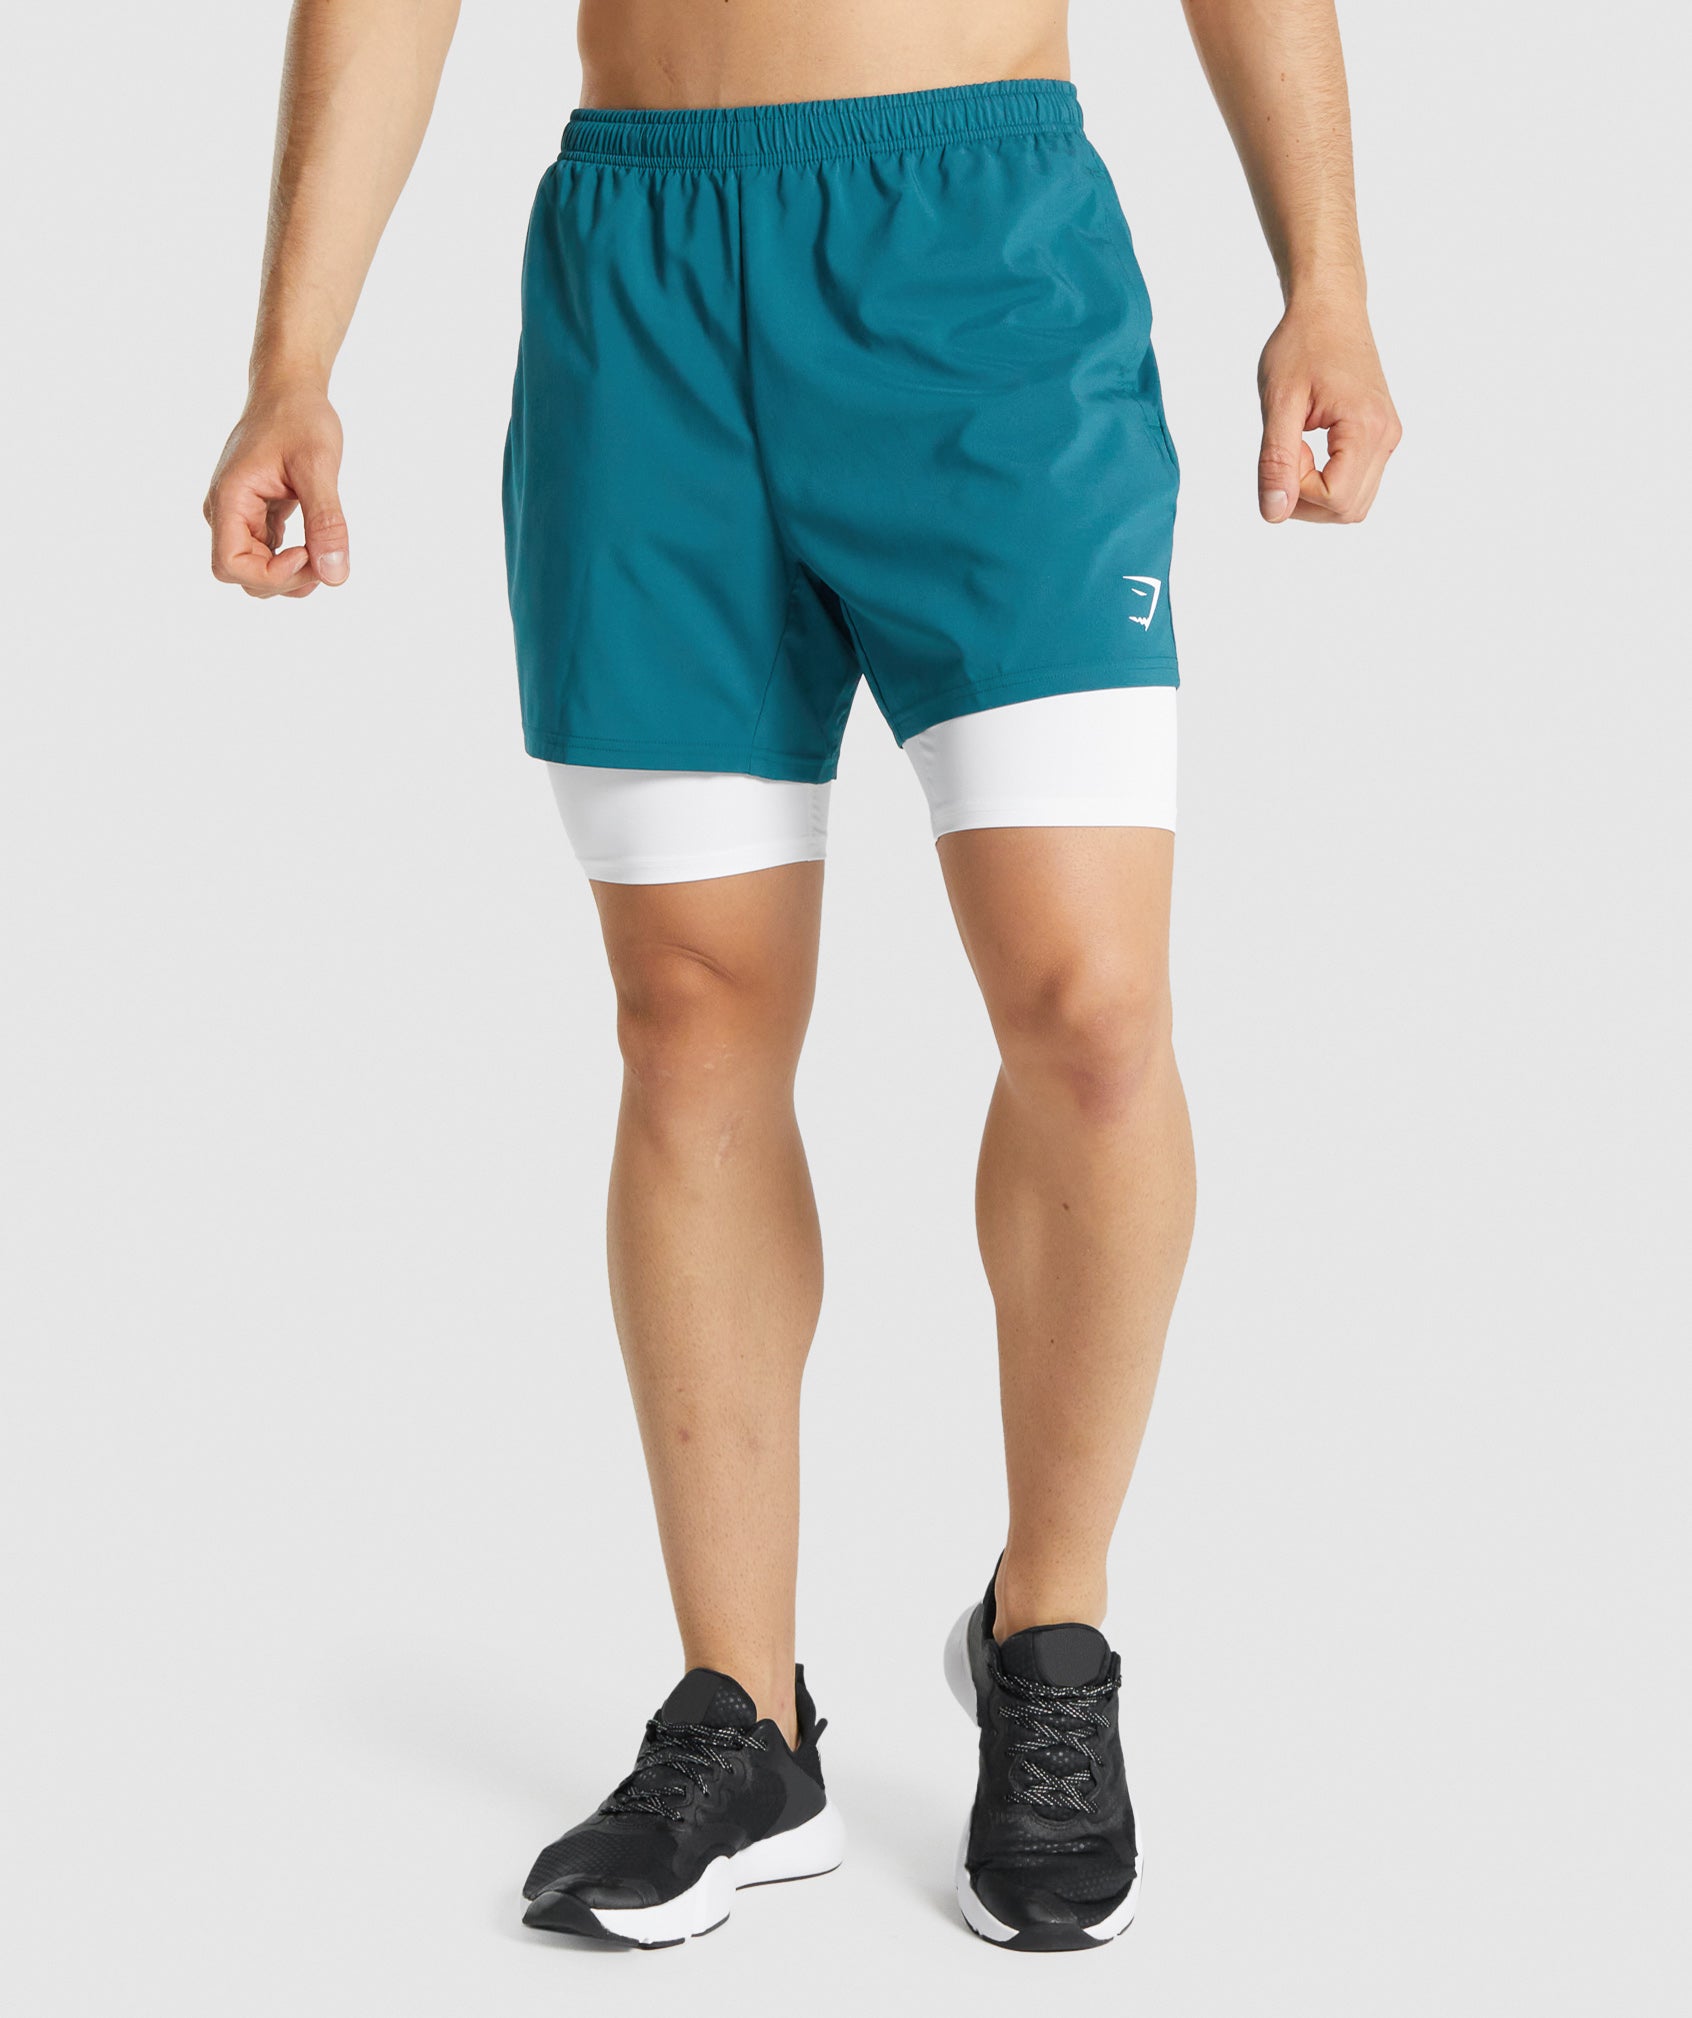 Element Baselayer Shorts in White